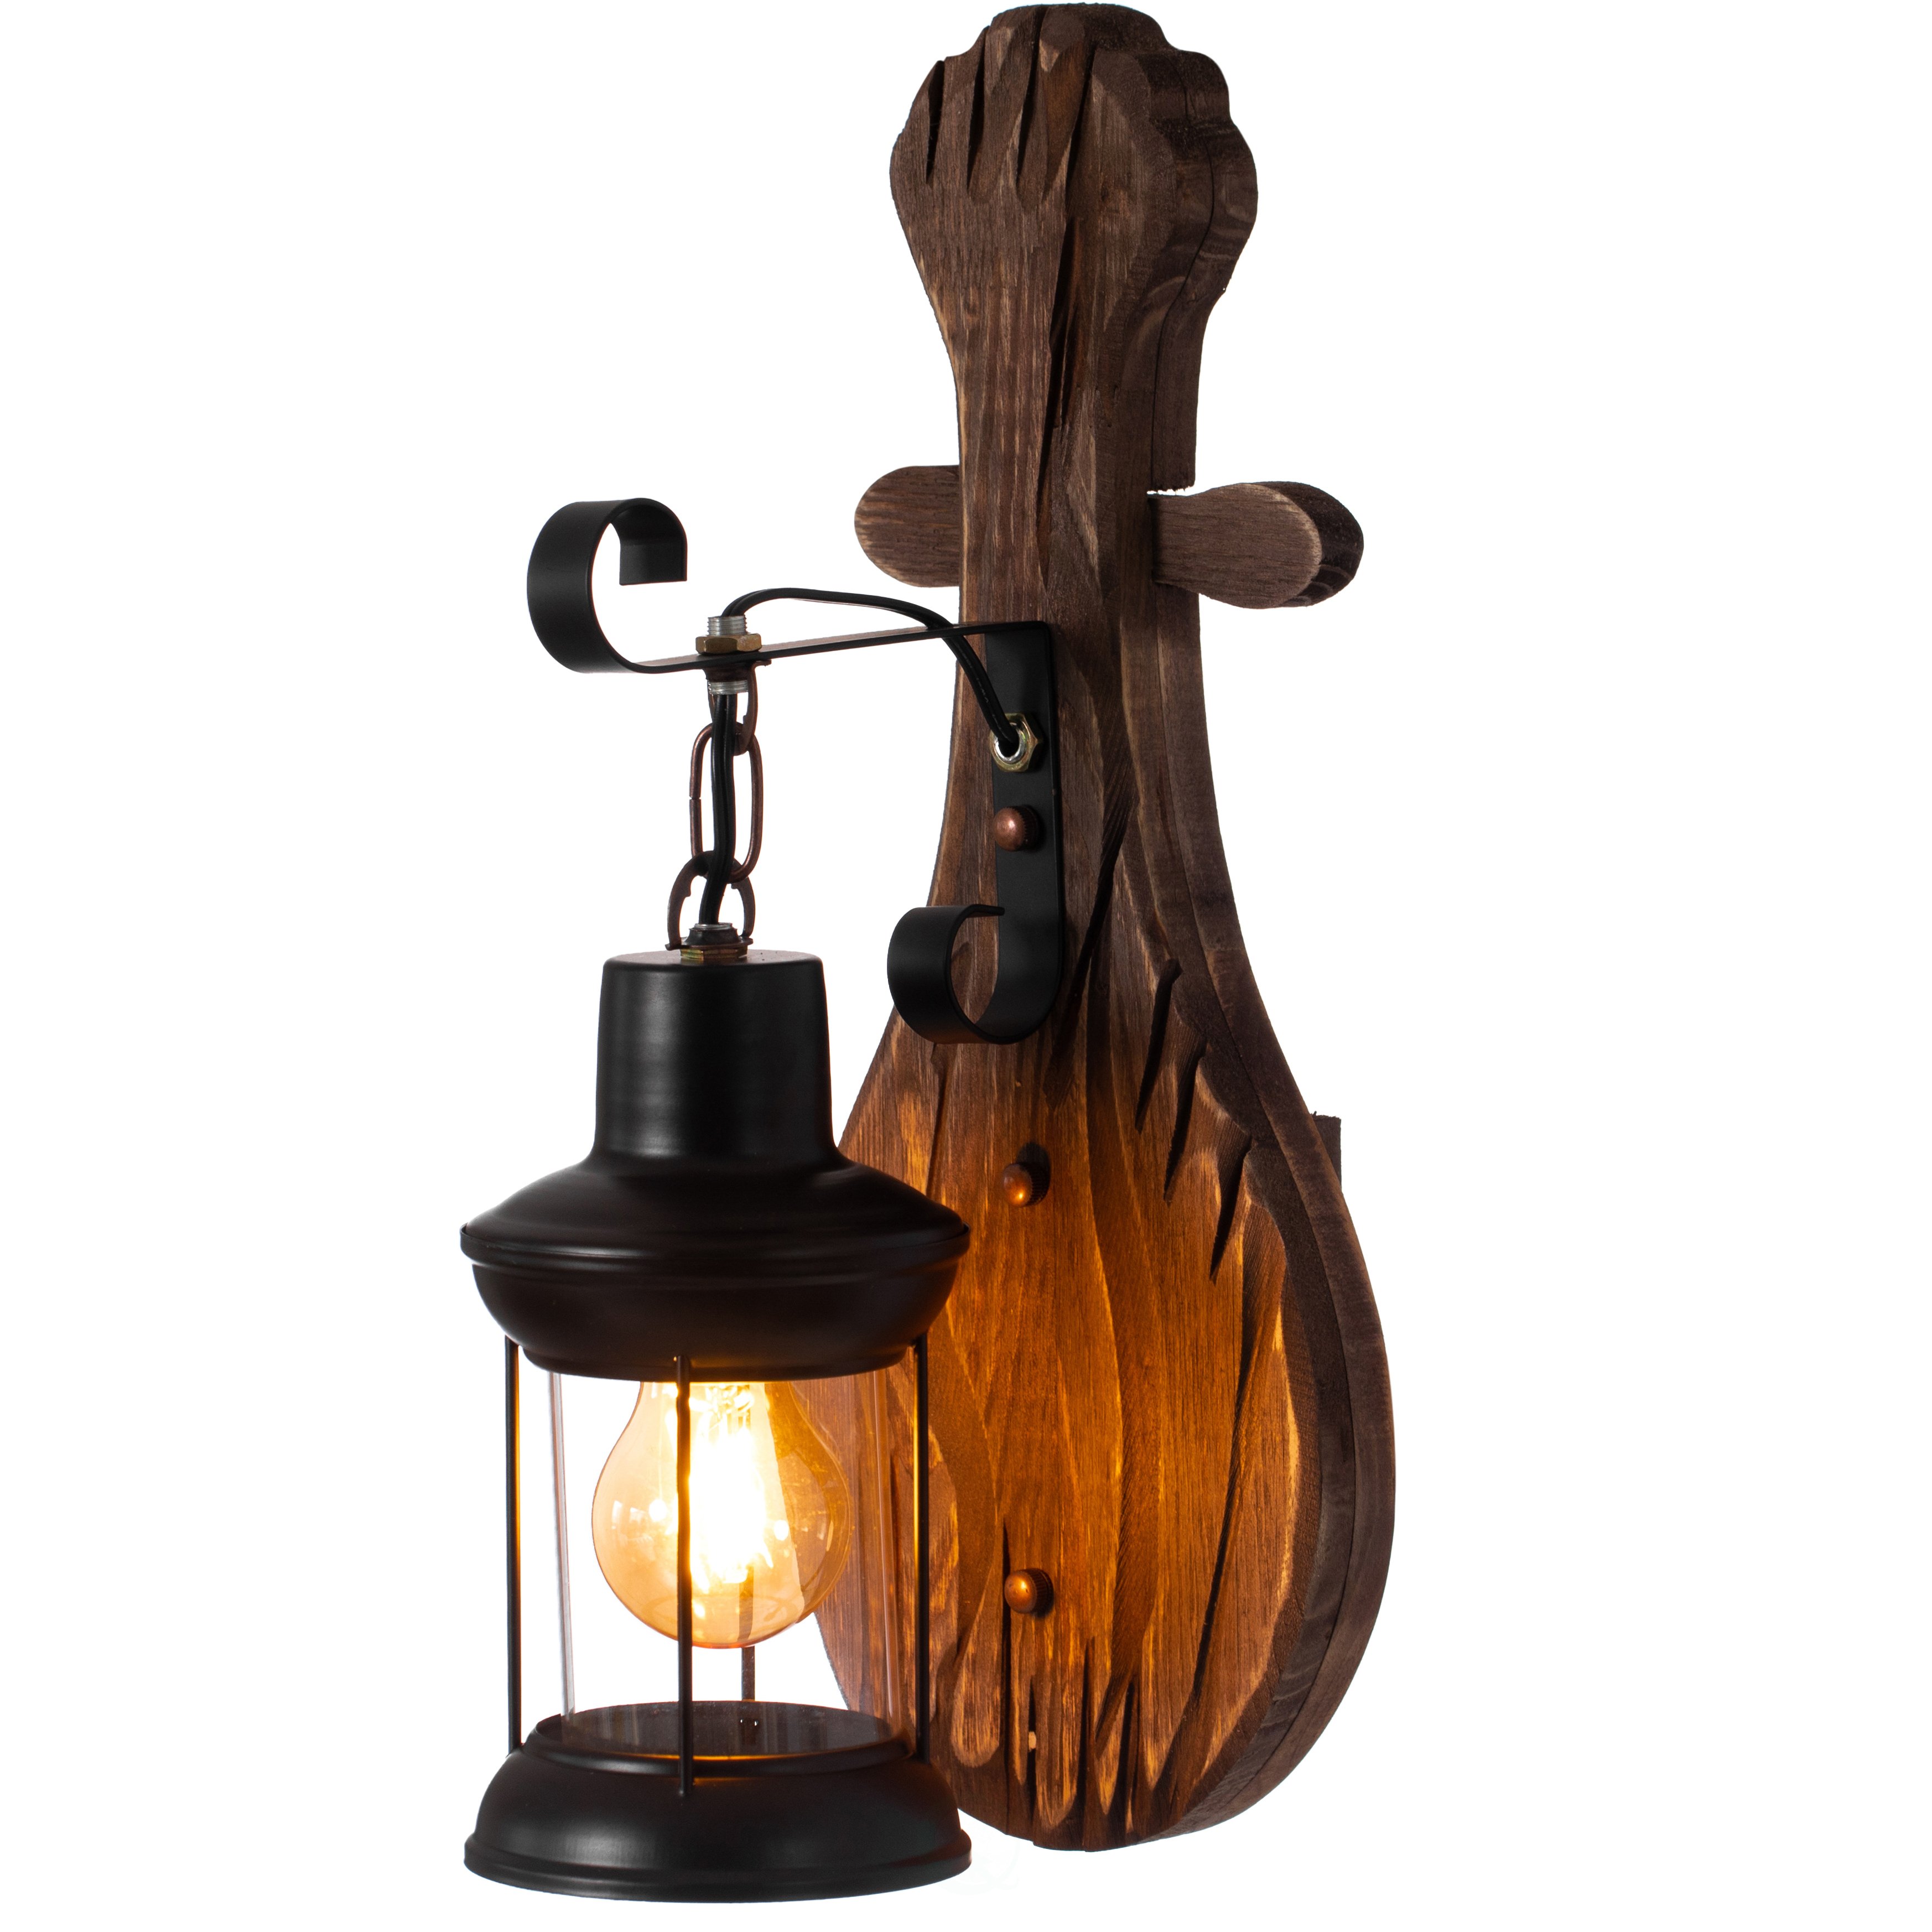 Vintage Industrial Unique Shape Wooden Wall Lamp, Wall Sconce Light For Home, Restaurant Or Bar - Set Of 2